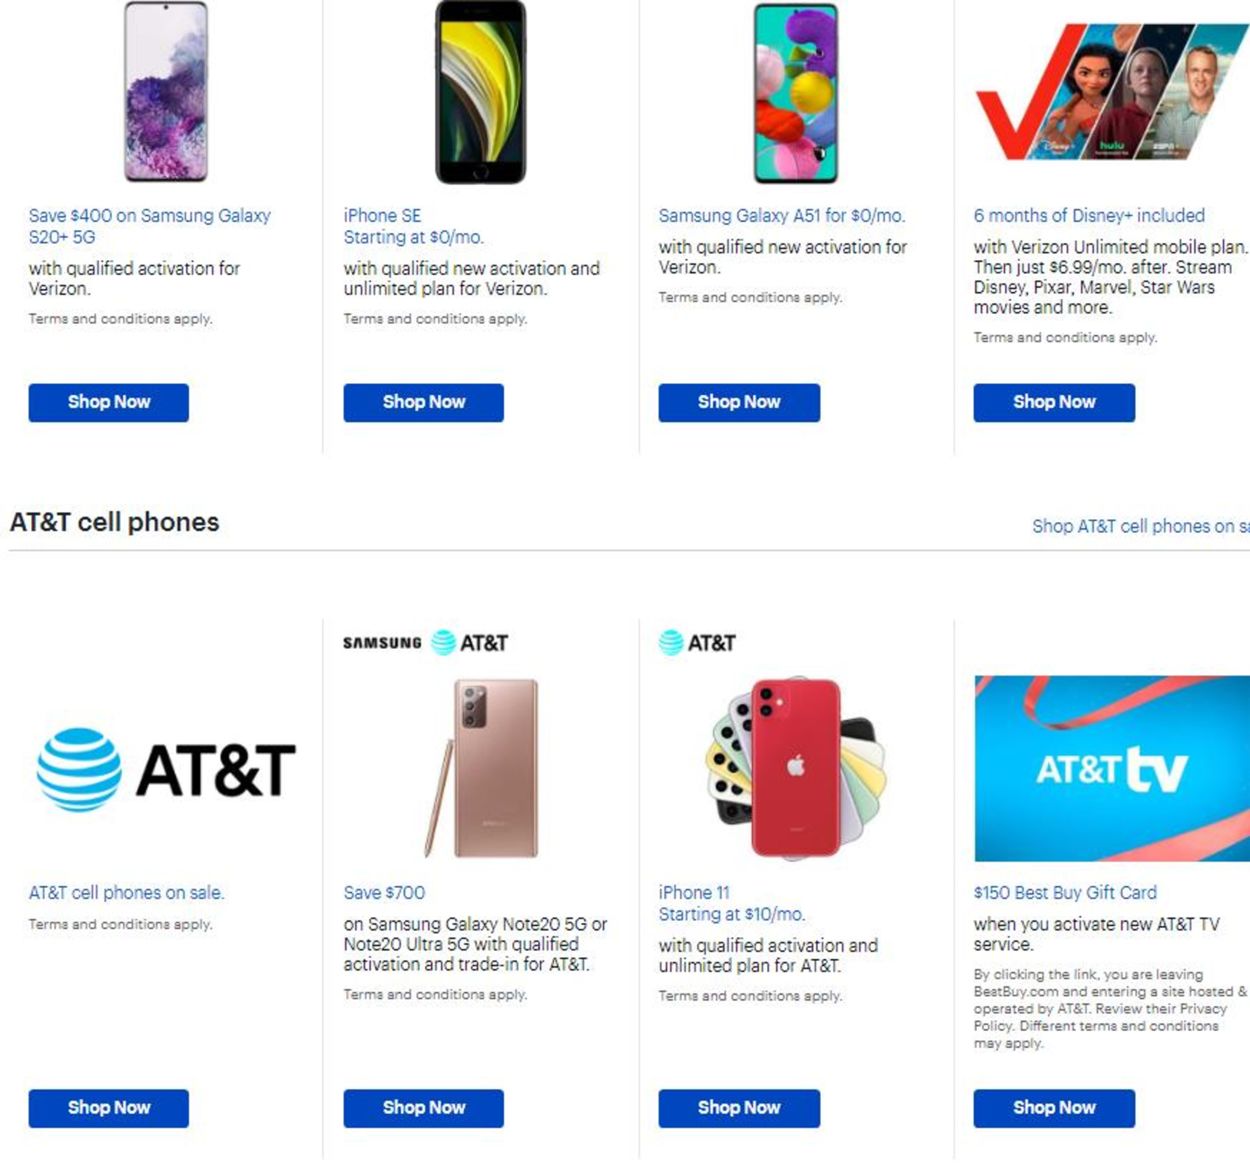 Catalogue Best Buy Black Friday 2020 from 11/13/2020